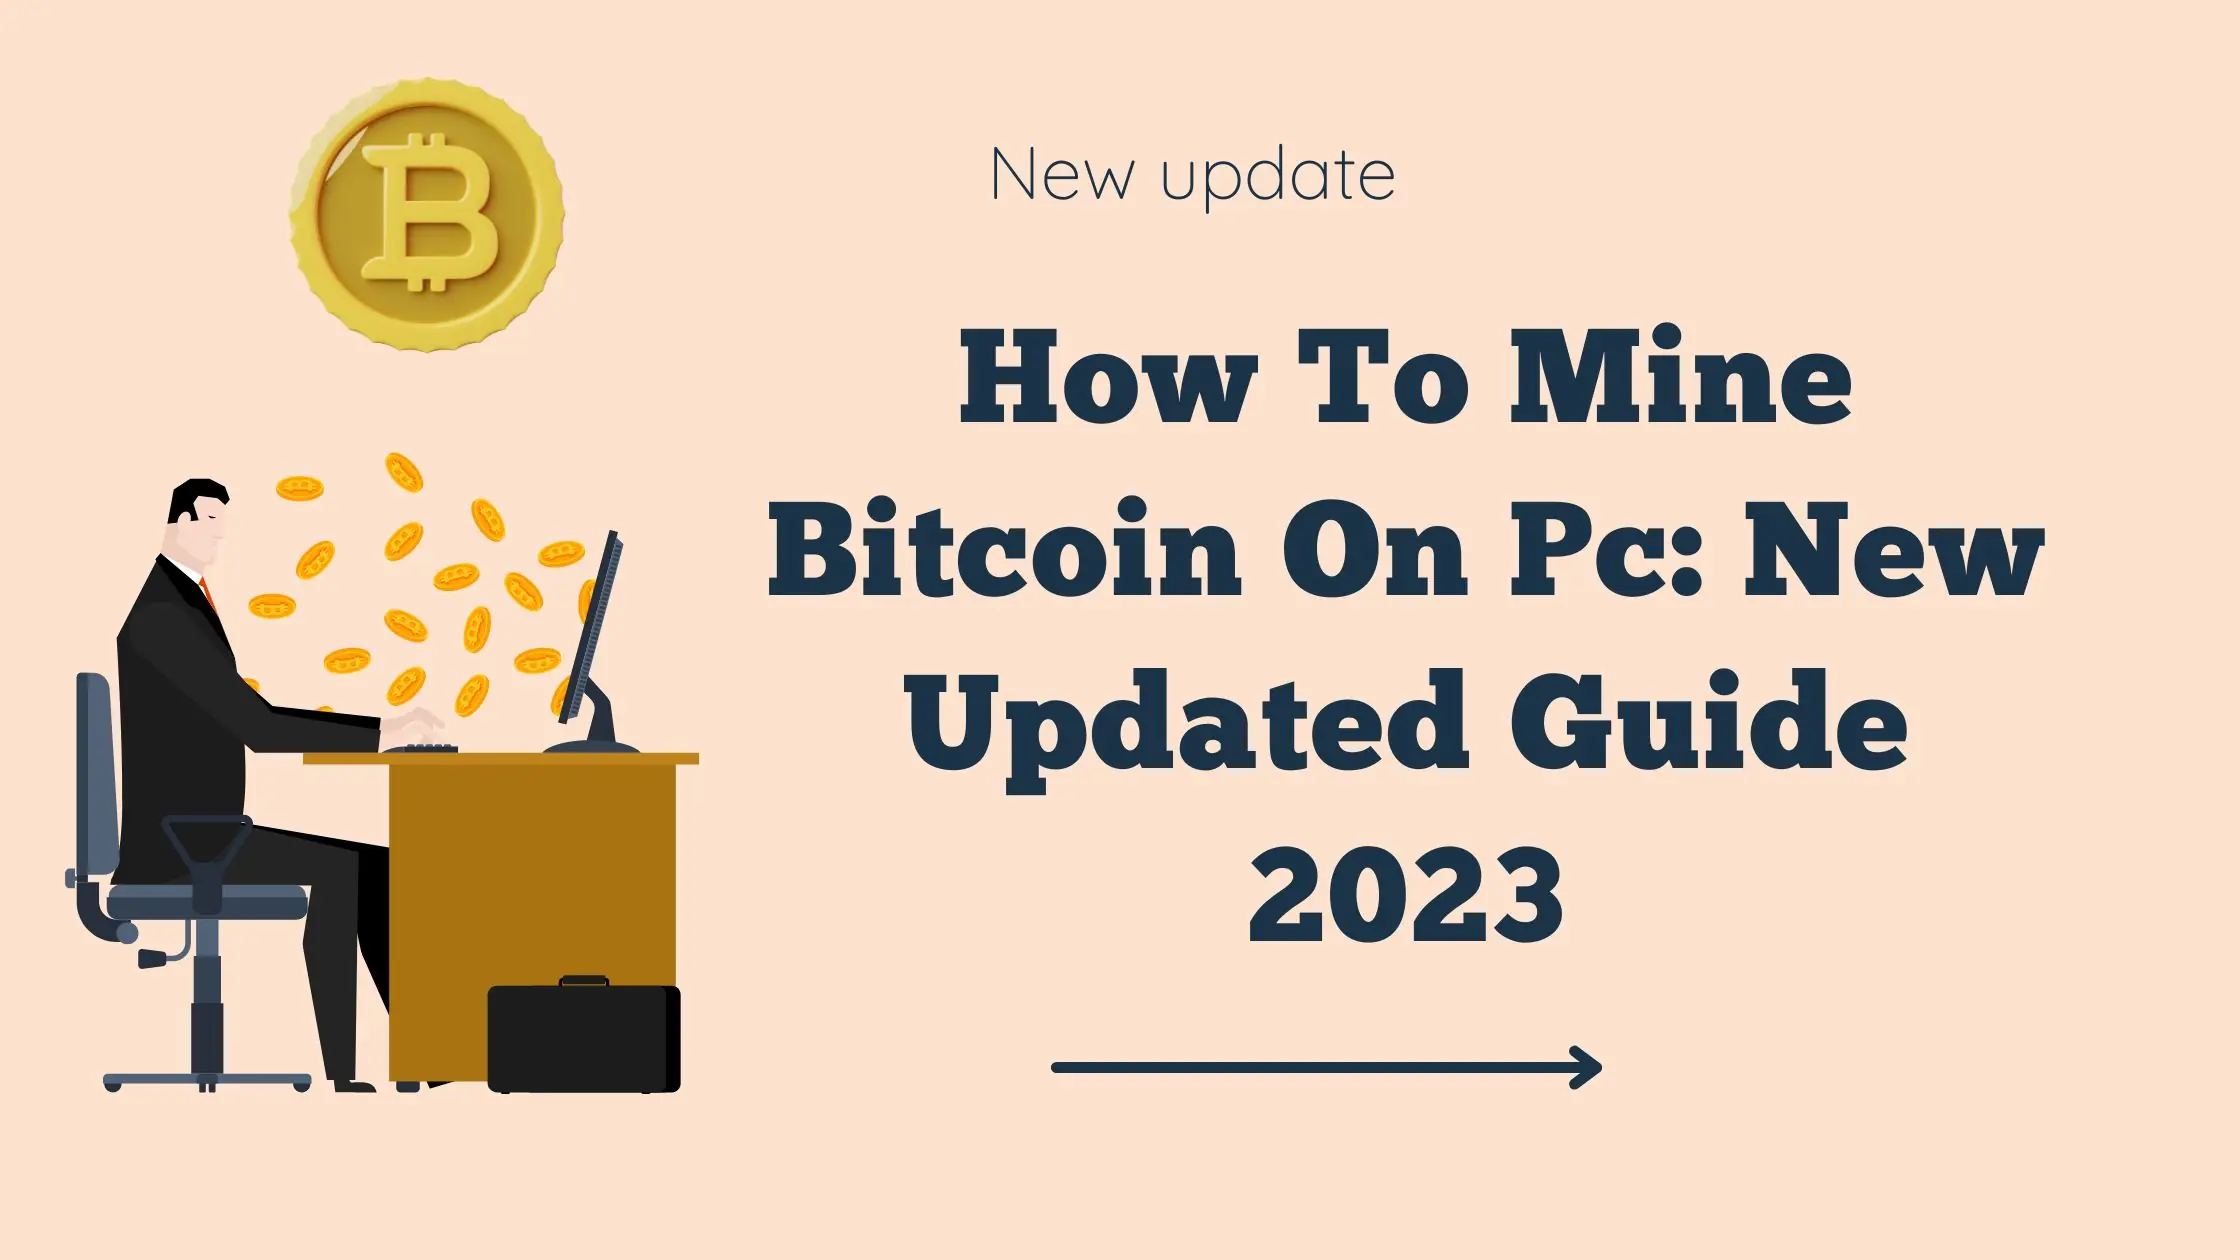 How To Mine Bitcoin On Pc: New Updated Guide 2023